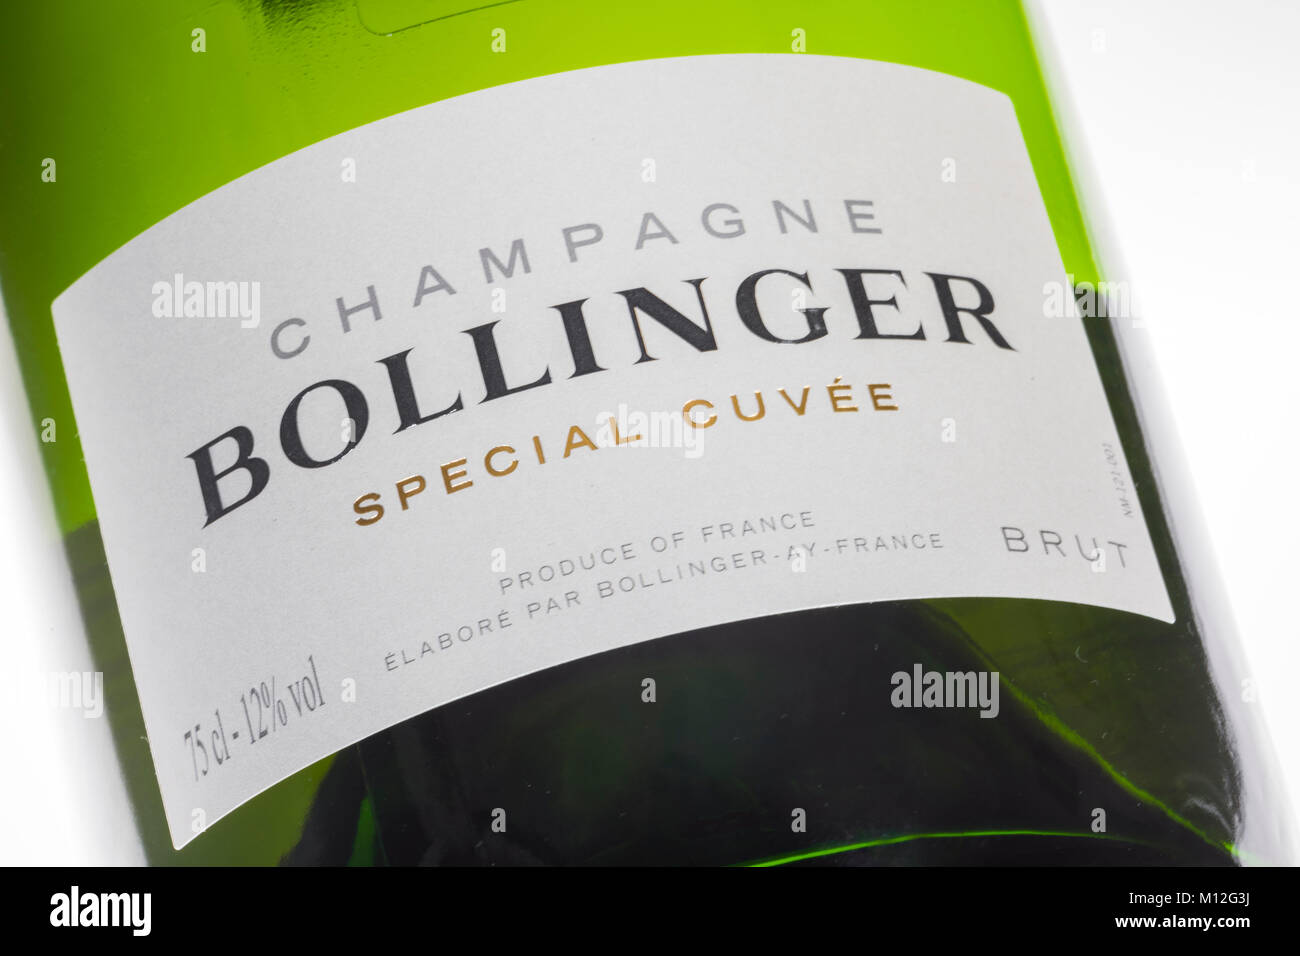 Bollinger champagne label, special cuvee. Stock Photo